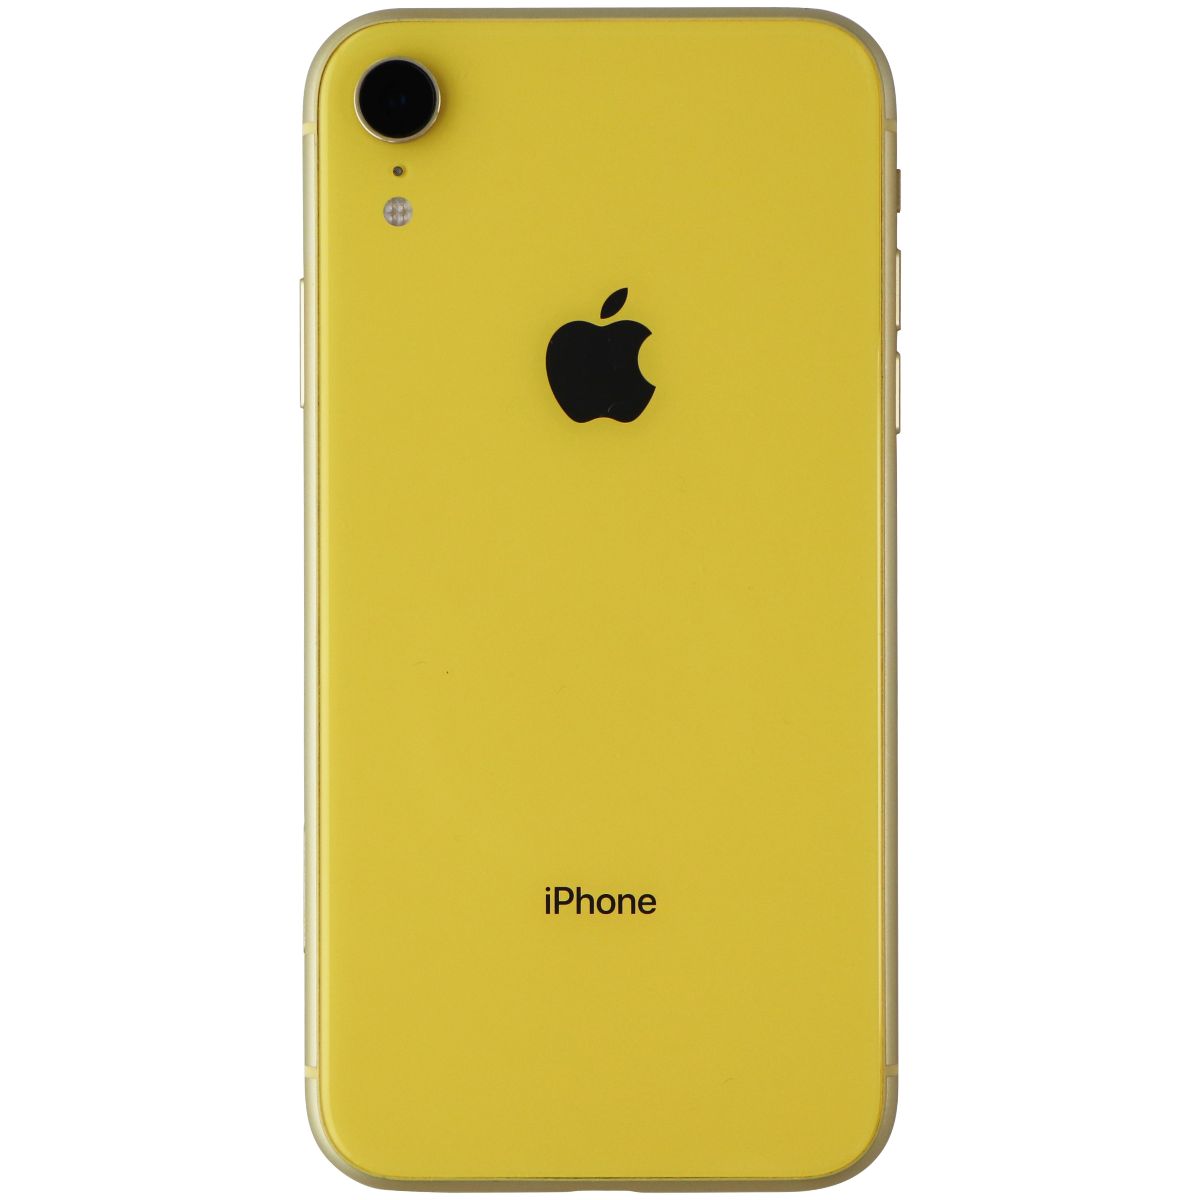 Apple iPhone XR (6.1-inch) Smartphone (A2106) Unlocked -  64GB / Yellow Cell Phones & Smartphones Apple    - Simple Cell Bulk Wholesale Pricing - USA Seller